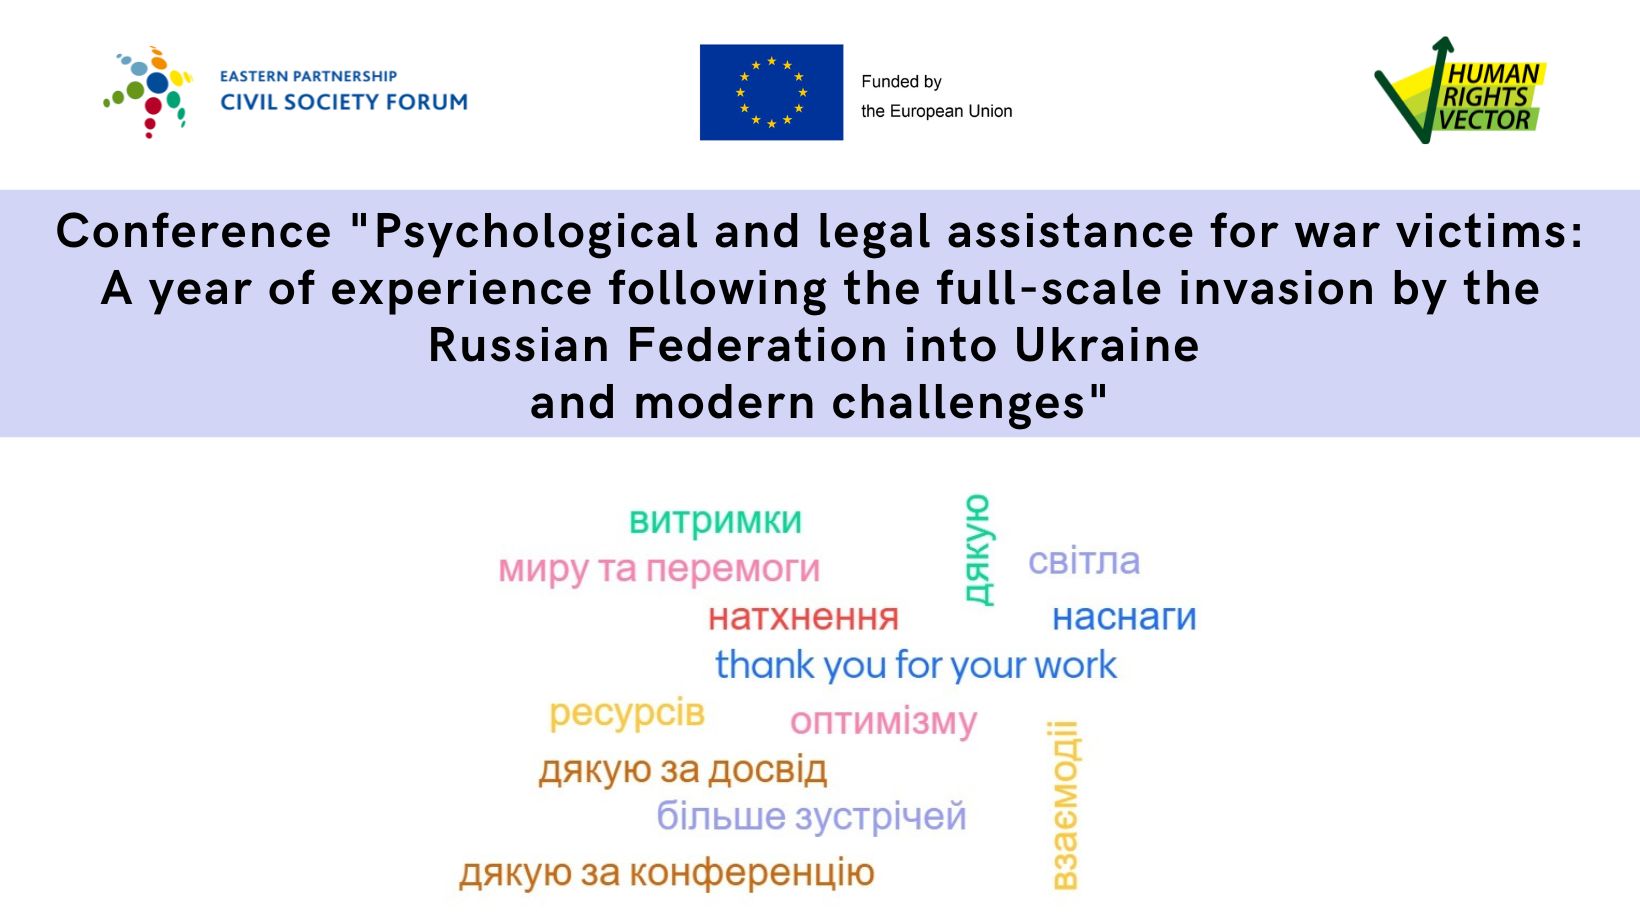 Reflections on the year; the conference "Psychological and legal assistance for war victims: A year of experience following the full-scale invasion by the Russian Federation into Ukraine and modern challenges"